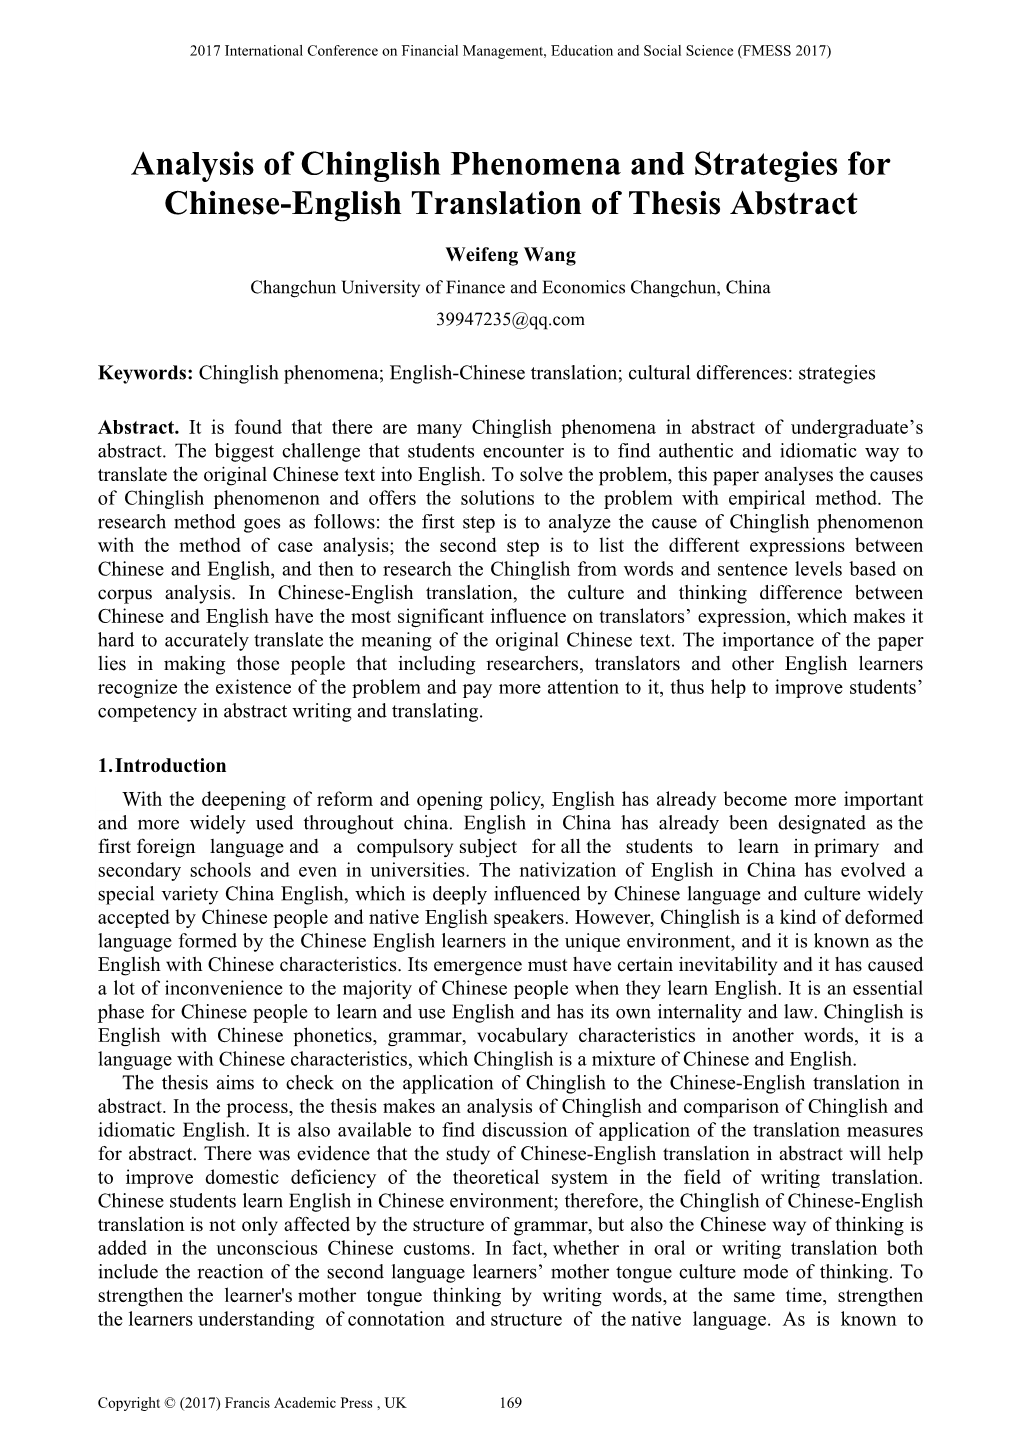 Analysis of Chinglish Phenomena and Strategies for Chinese-English Translation of Thesis Abstract